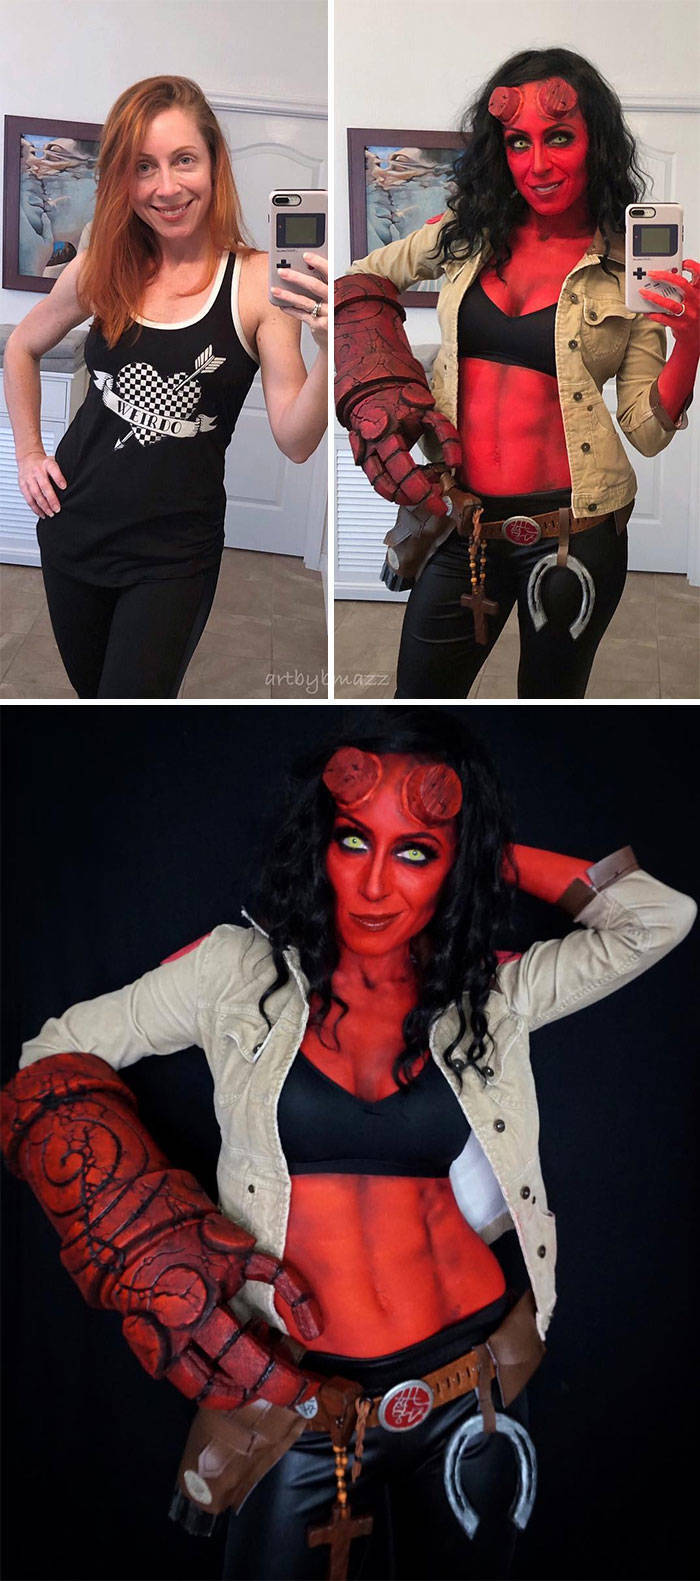 A Masterclass In Cosplay By Brenna Mazzoni